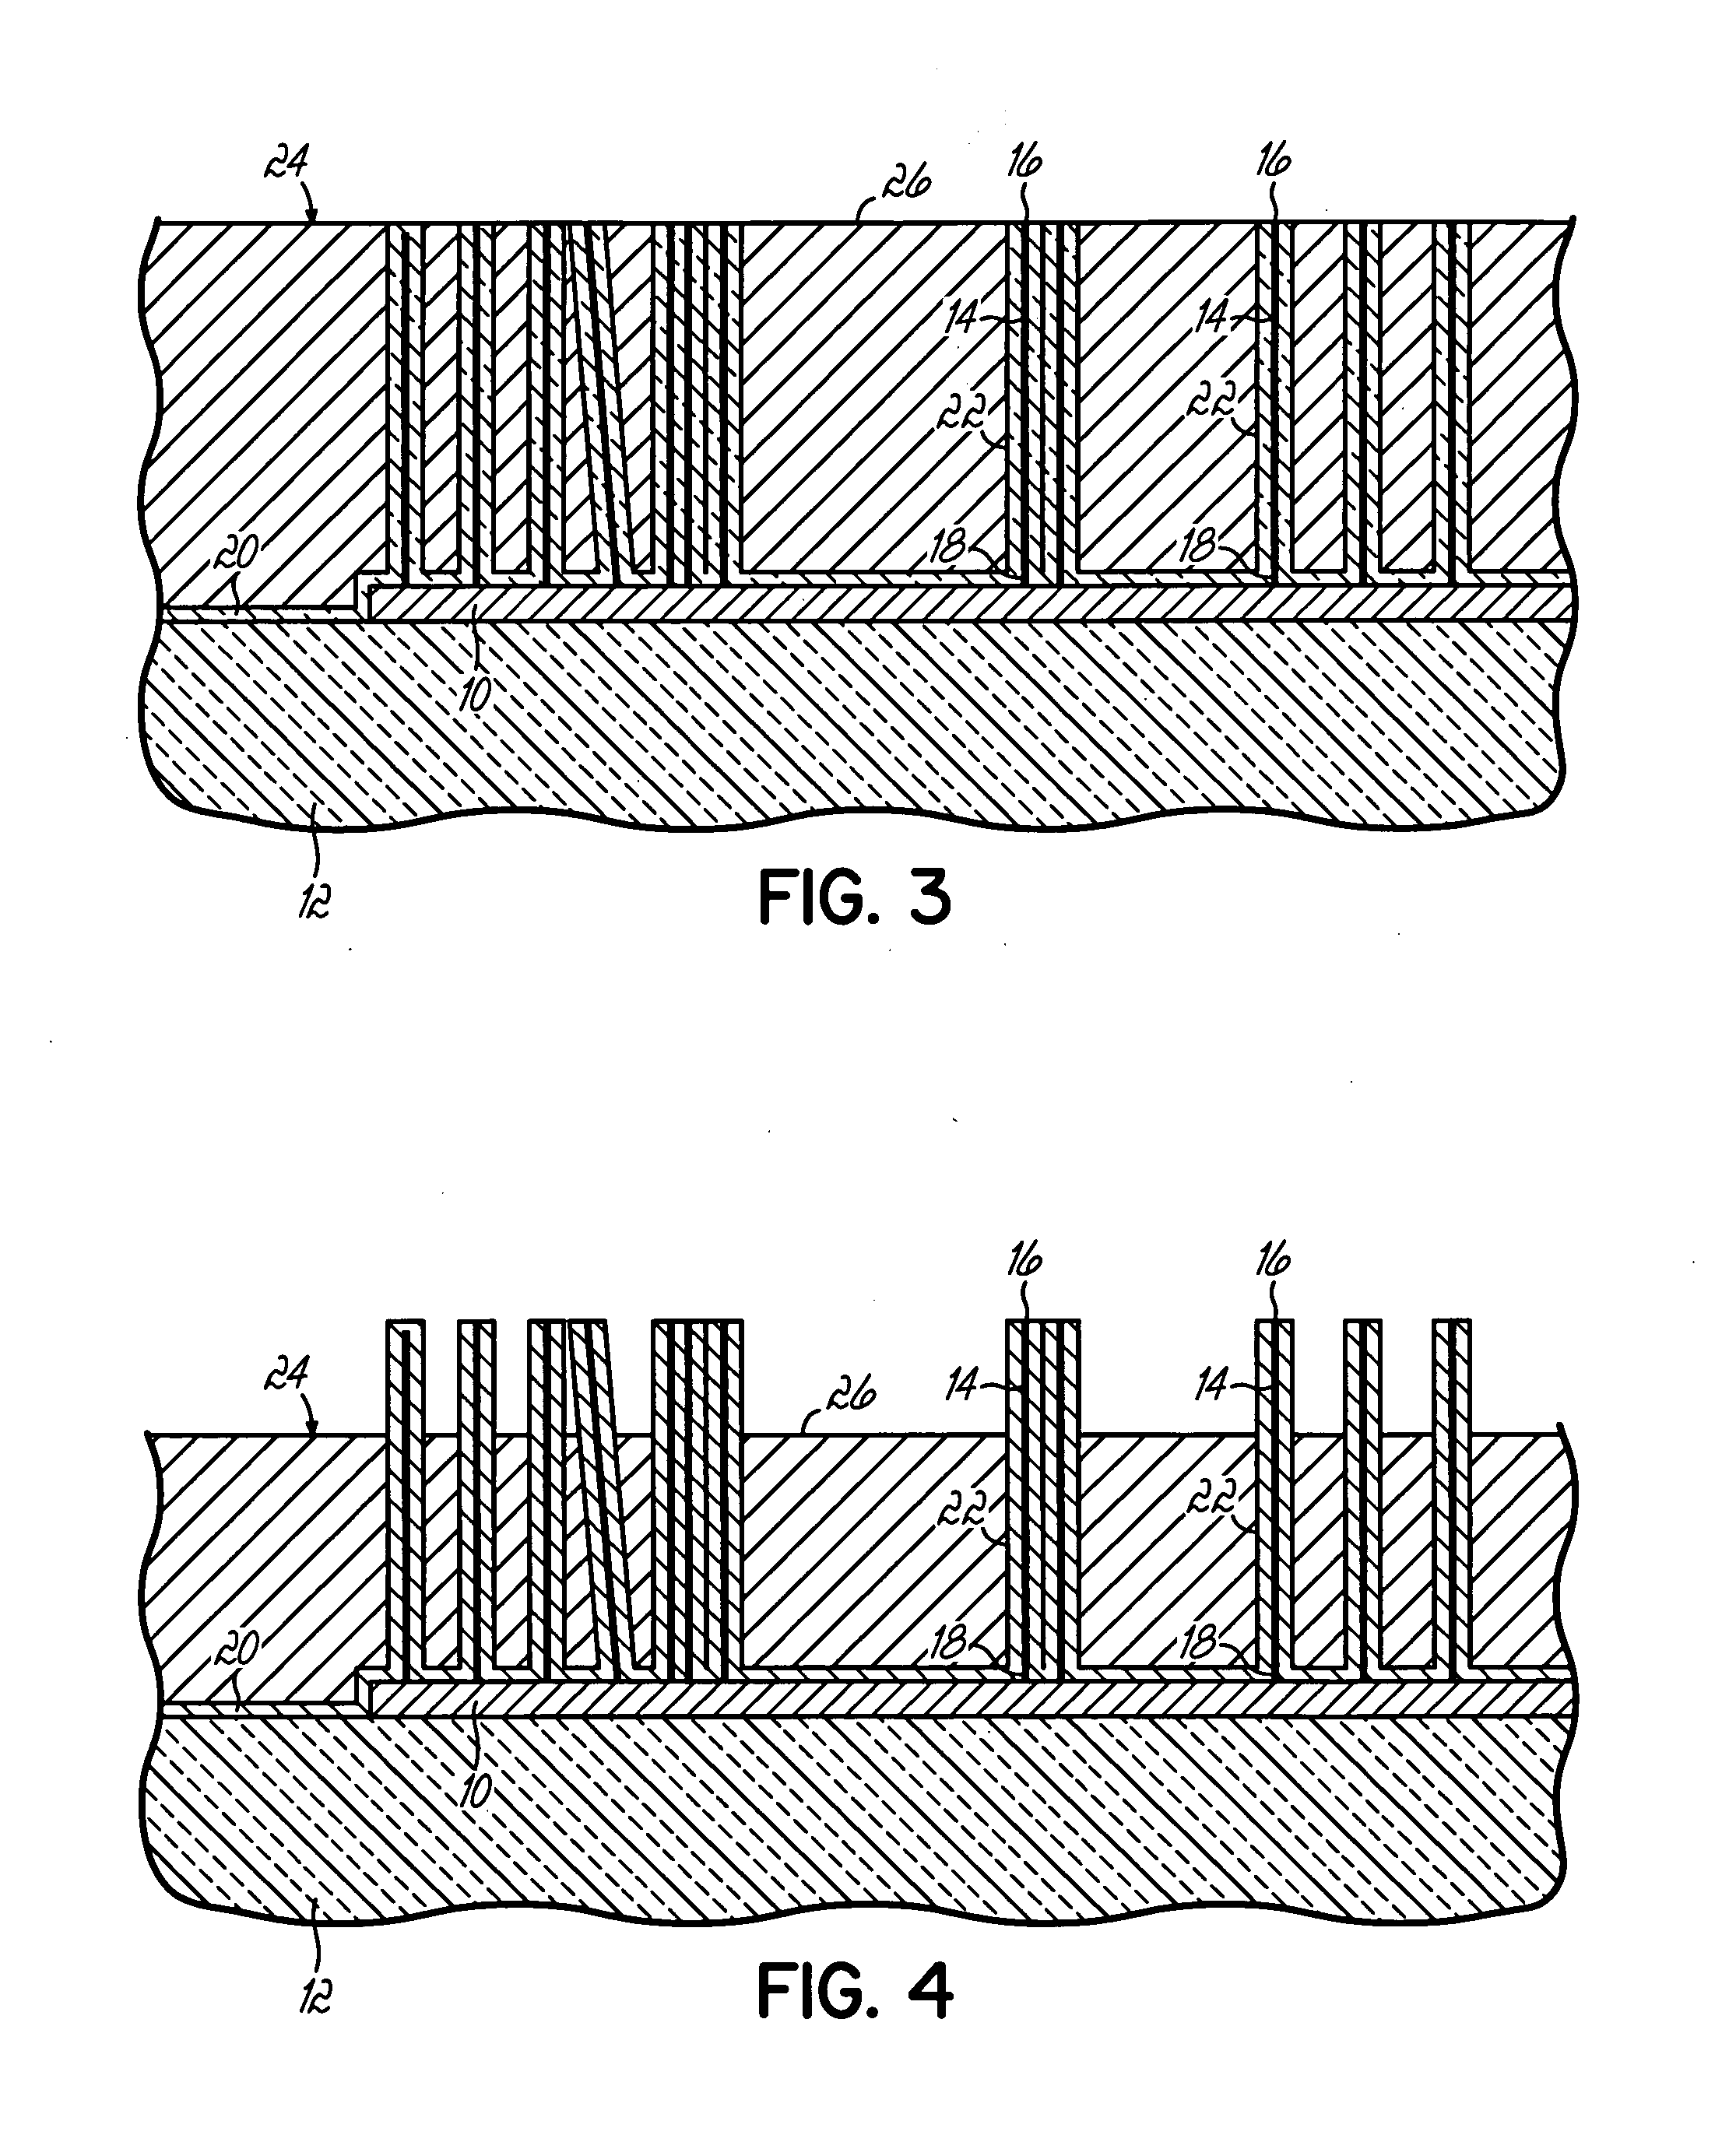 Vertical nanotube semiconductor device structures and methods of forming the same